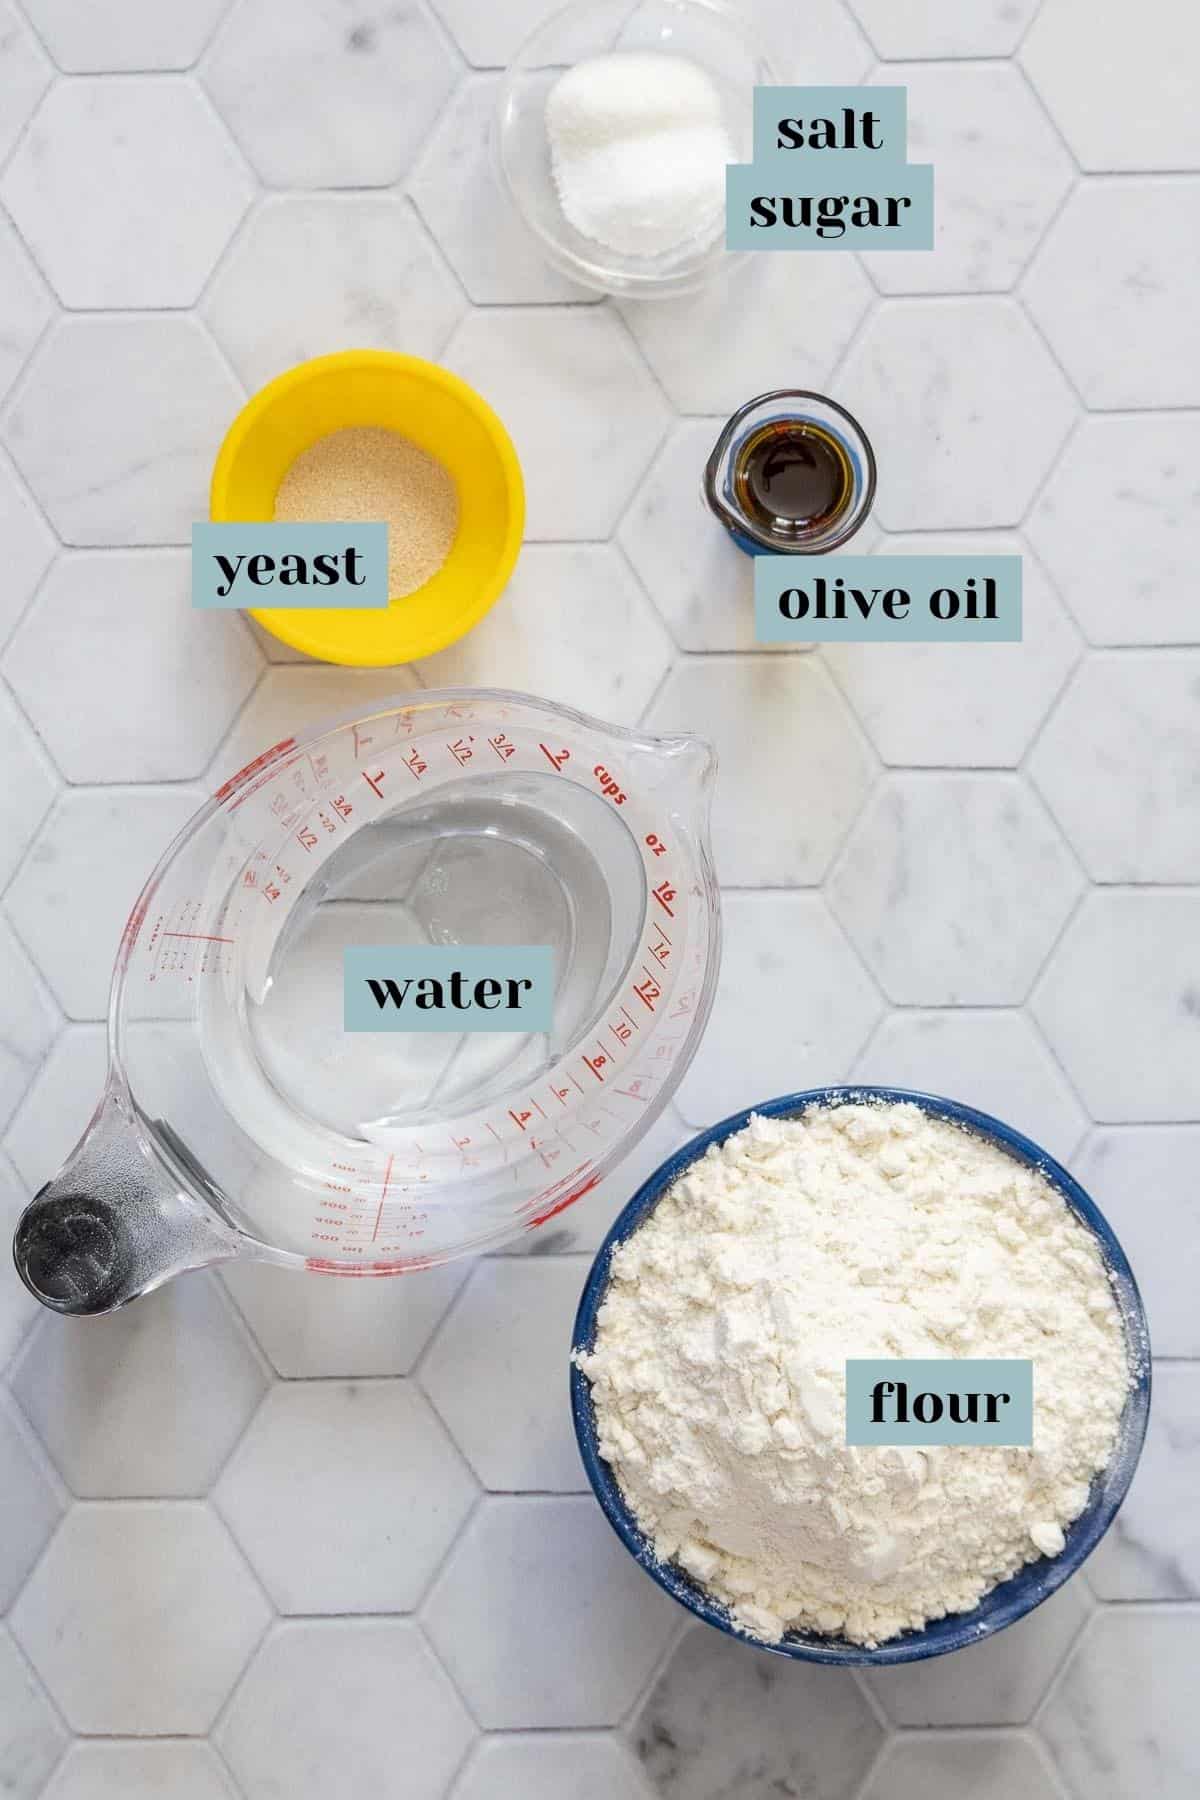 Ingredients for homemade pizza dough on a tile surface with labels.